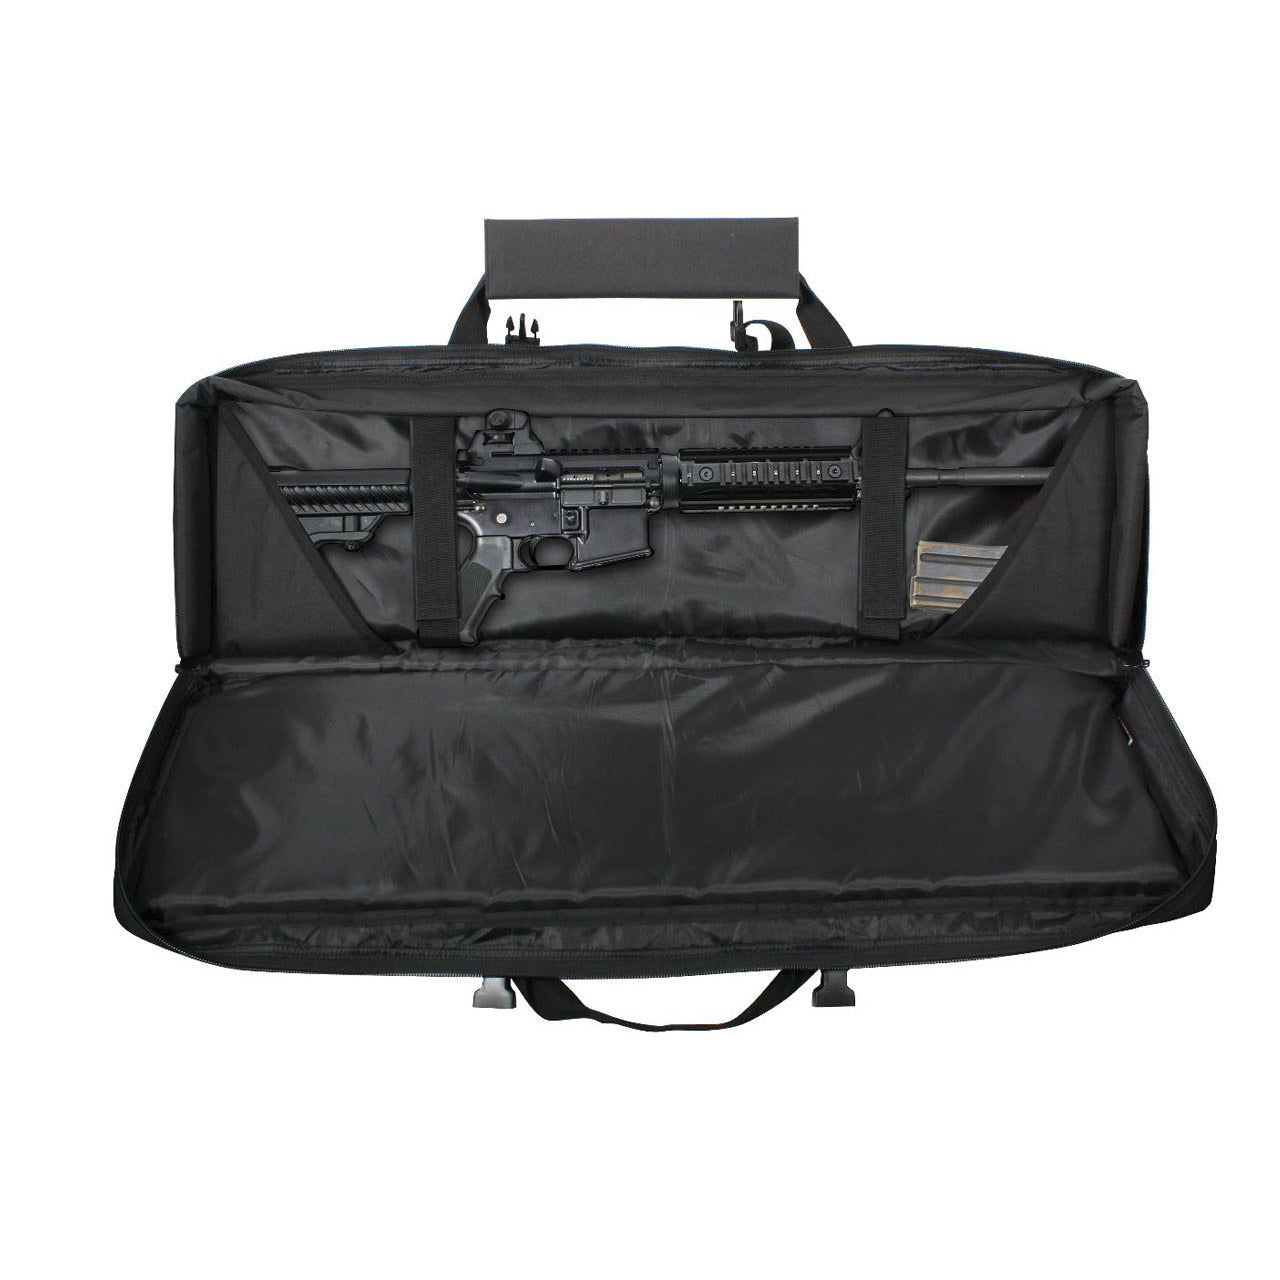 Rothco’s Tactical Rifle Case provides enhanced padded protection while transporting your firearm from the field to the range. www.defenceqstore.com.au